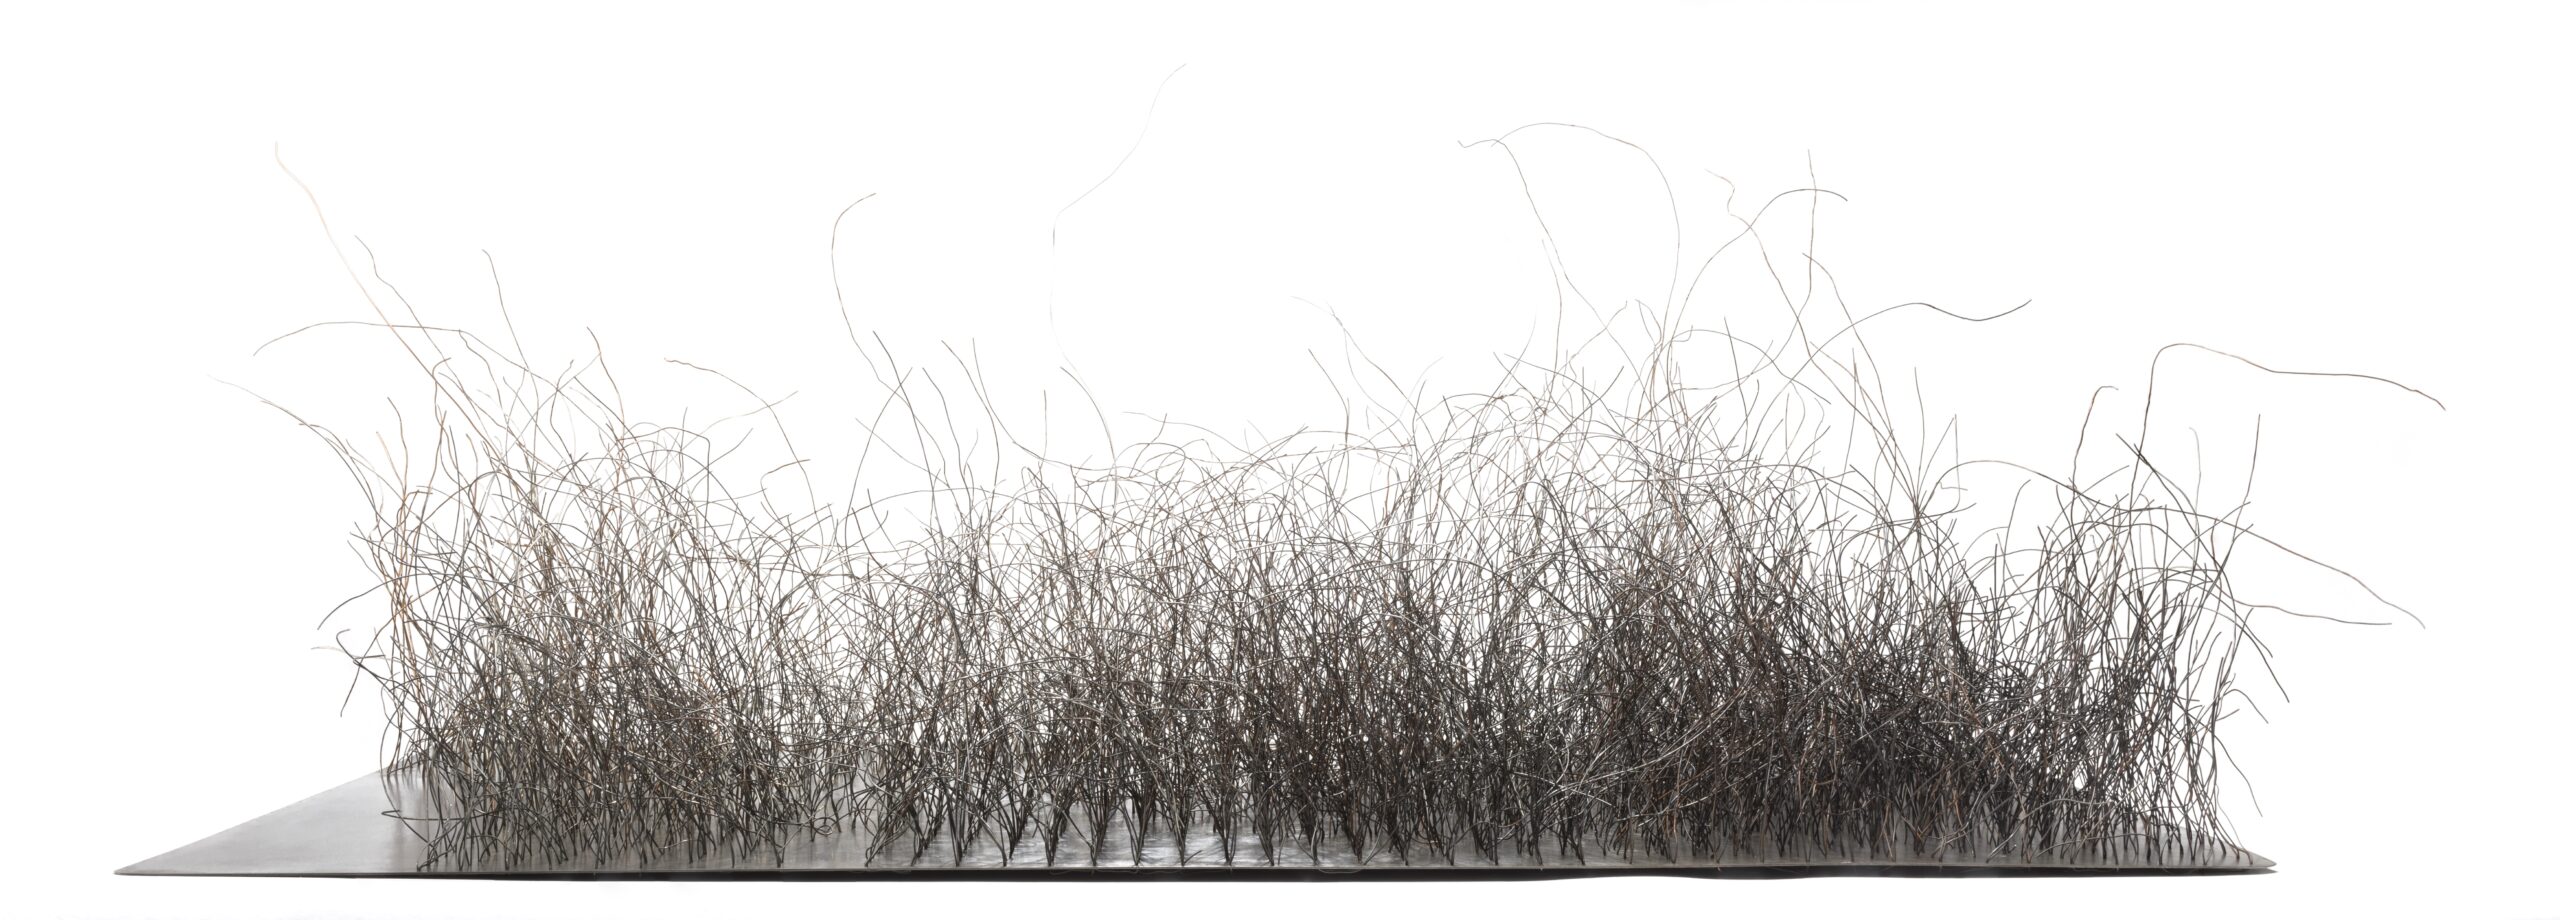 horizontal metal sculpture with strands coming out of it looking like grass or hair